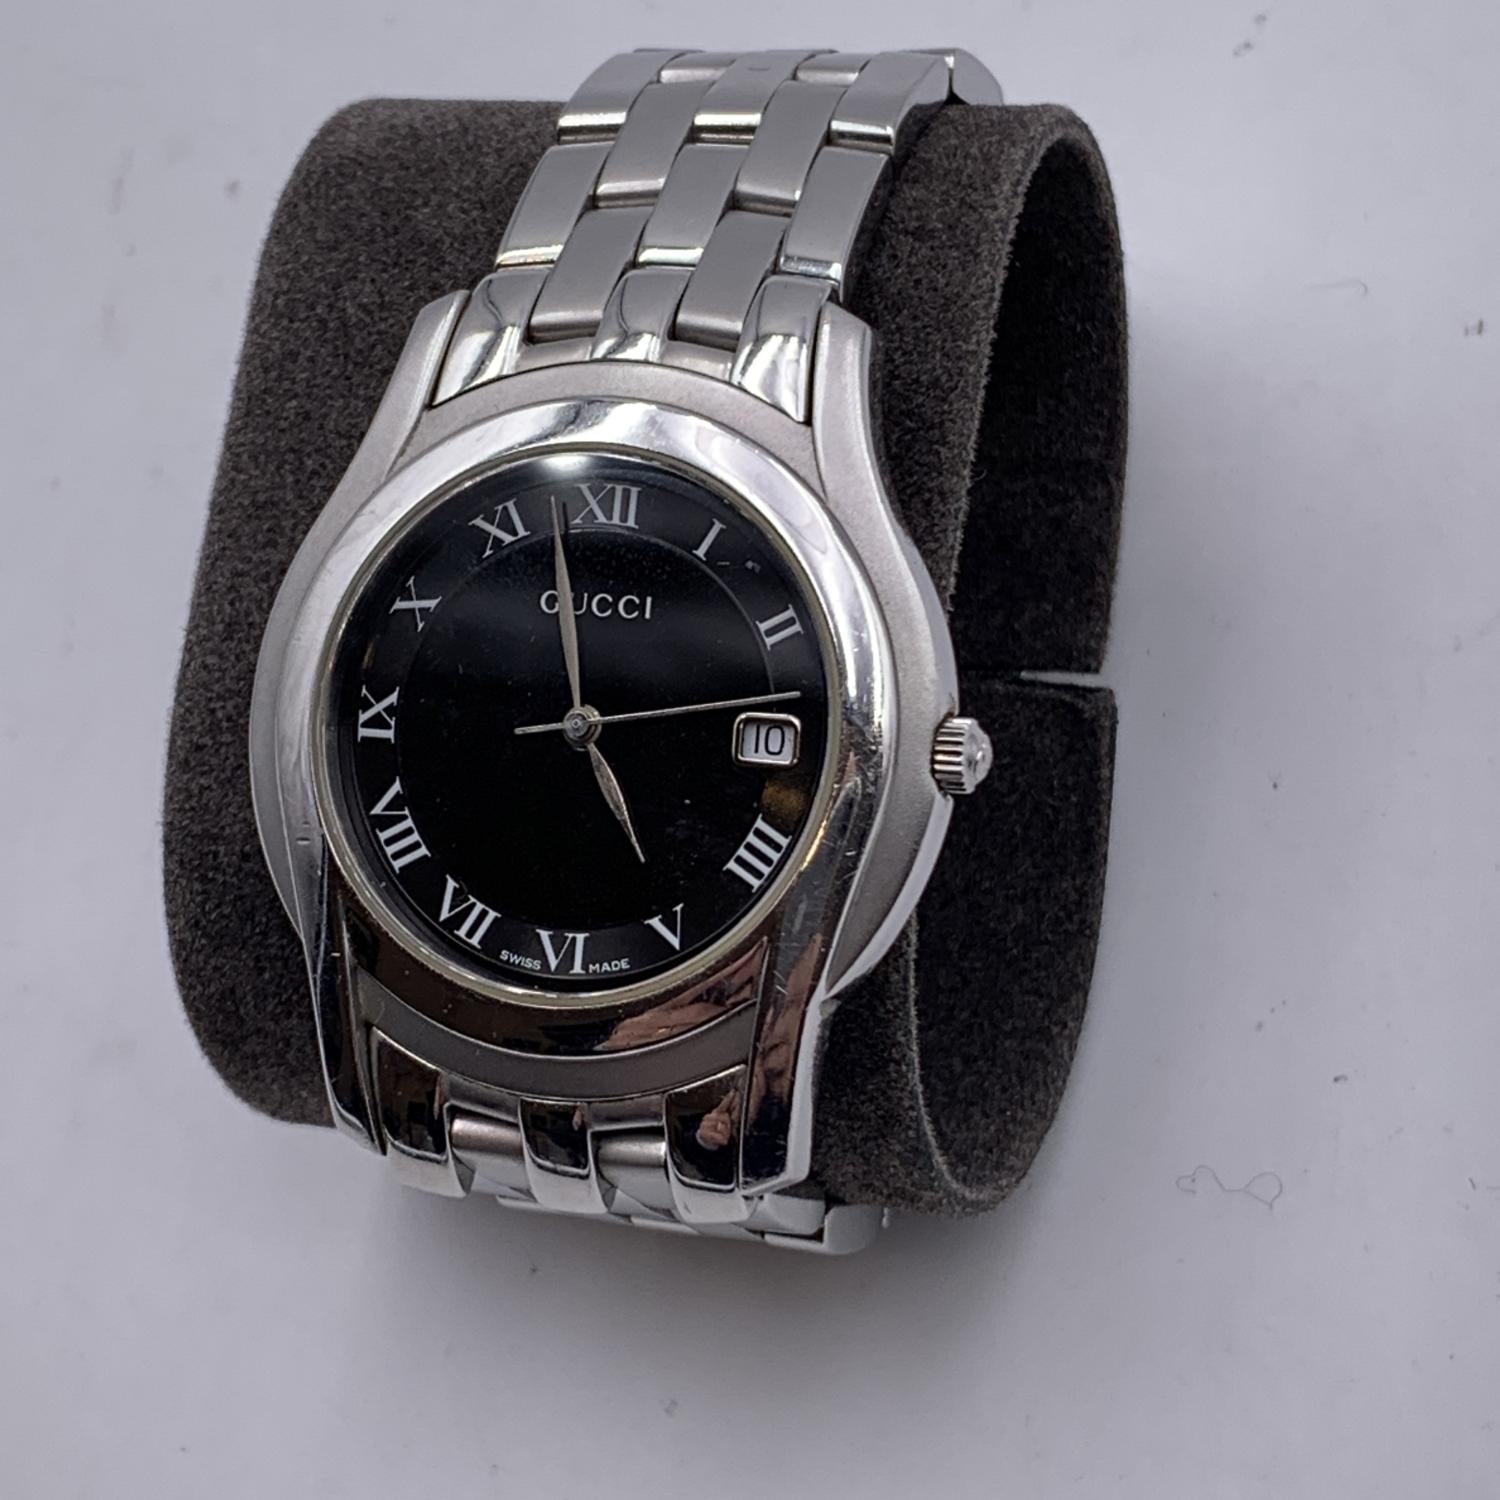 Gucci Stainless Steel Mod 5500 M Watch Date Indicator Black 6